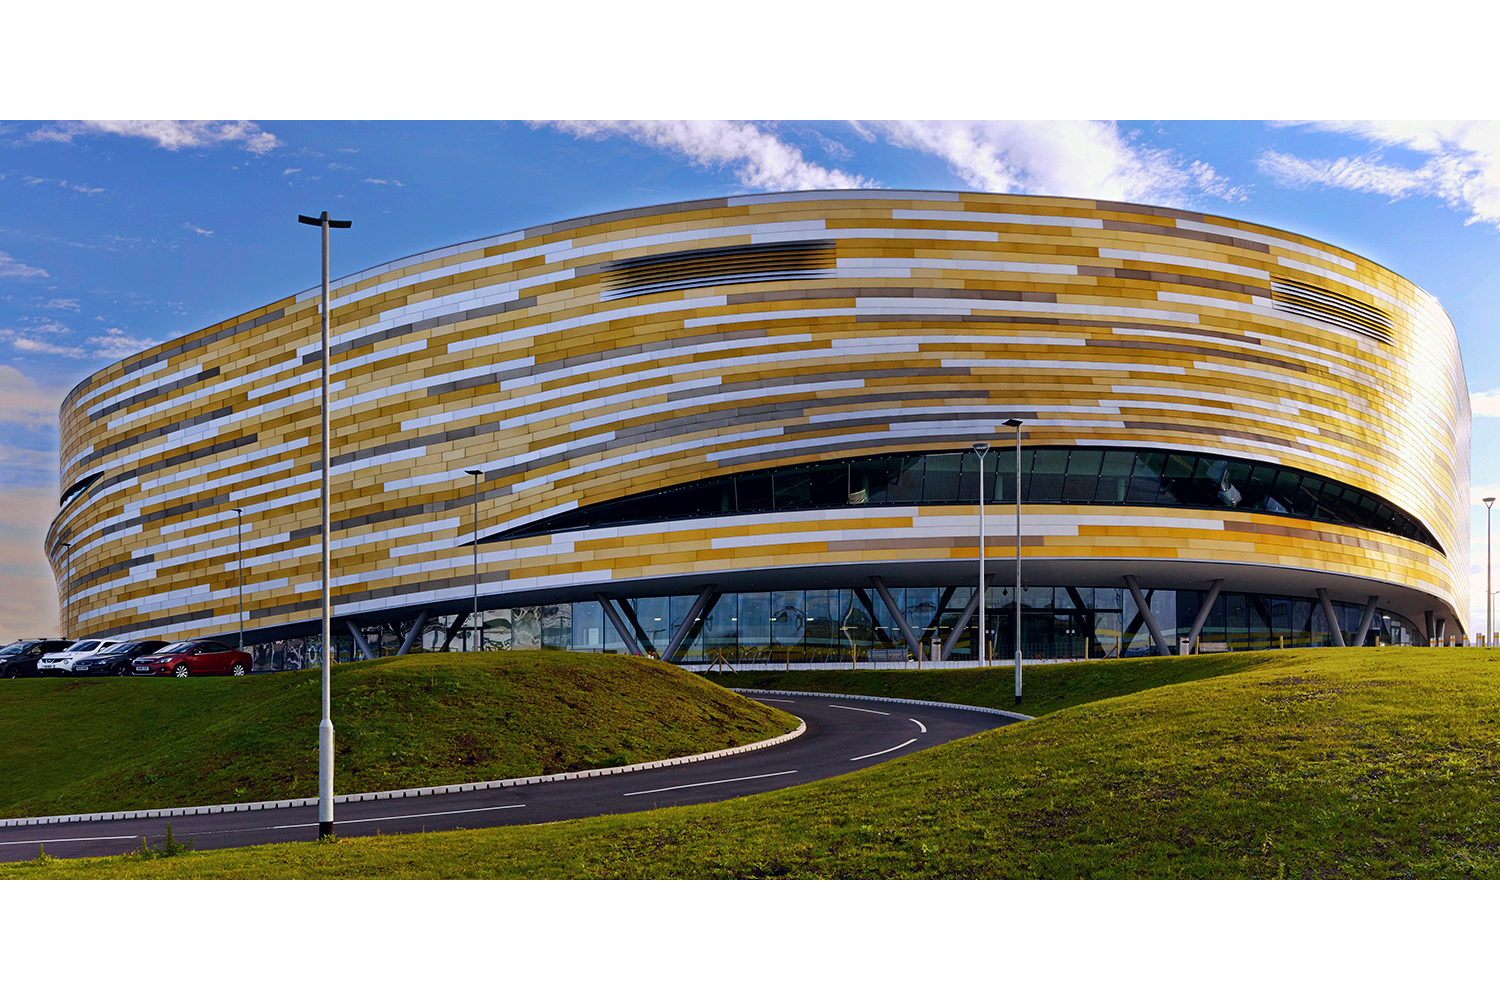 Architectural photography exterior: Derby Arena (Velodrome), Derby, Midlands, UK. Architects: Faulkner browns architects. Image (C) Matthewlingphotography.co.uk